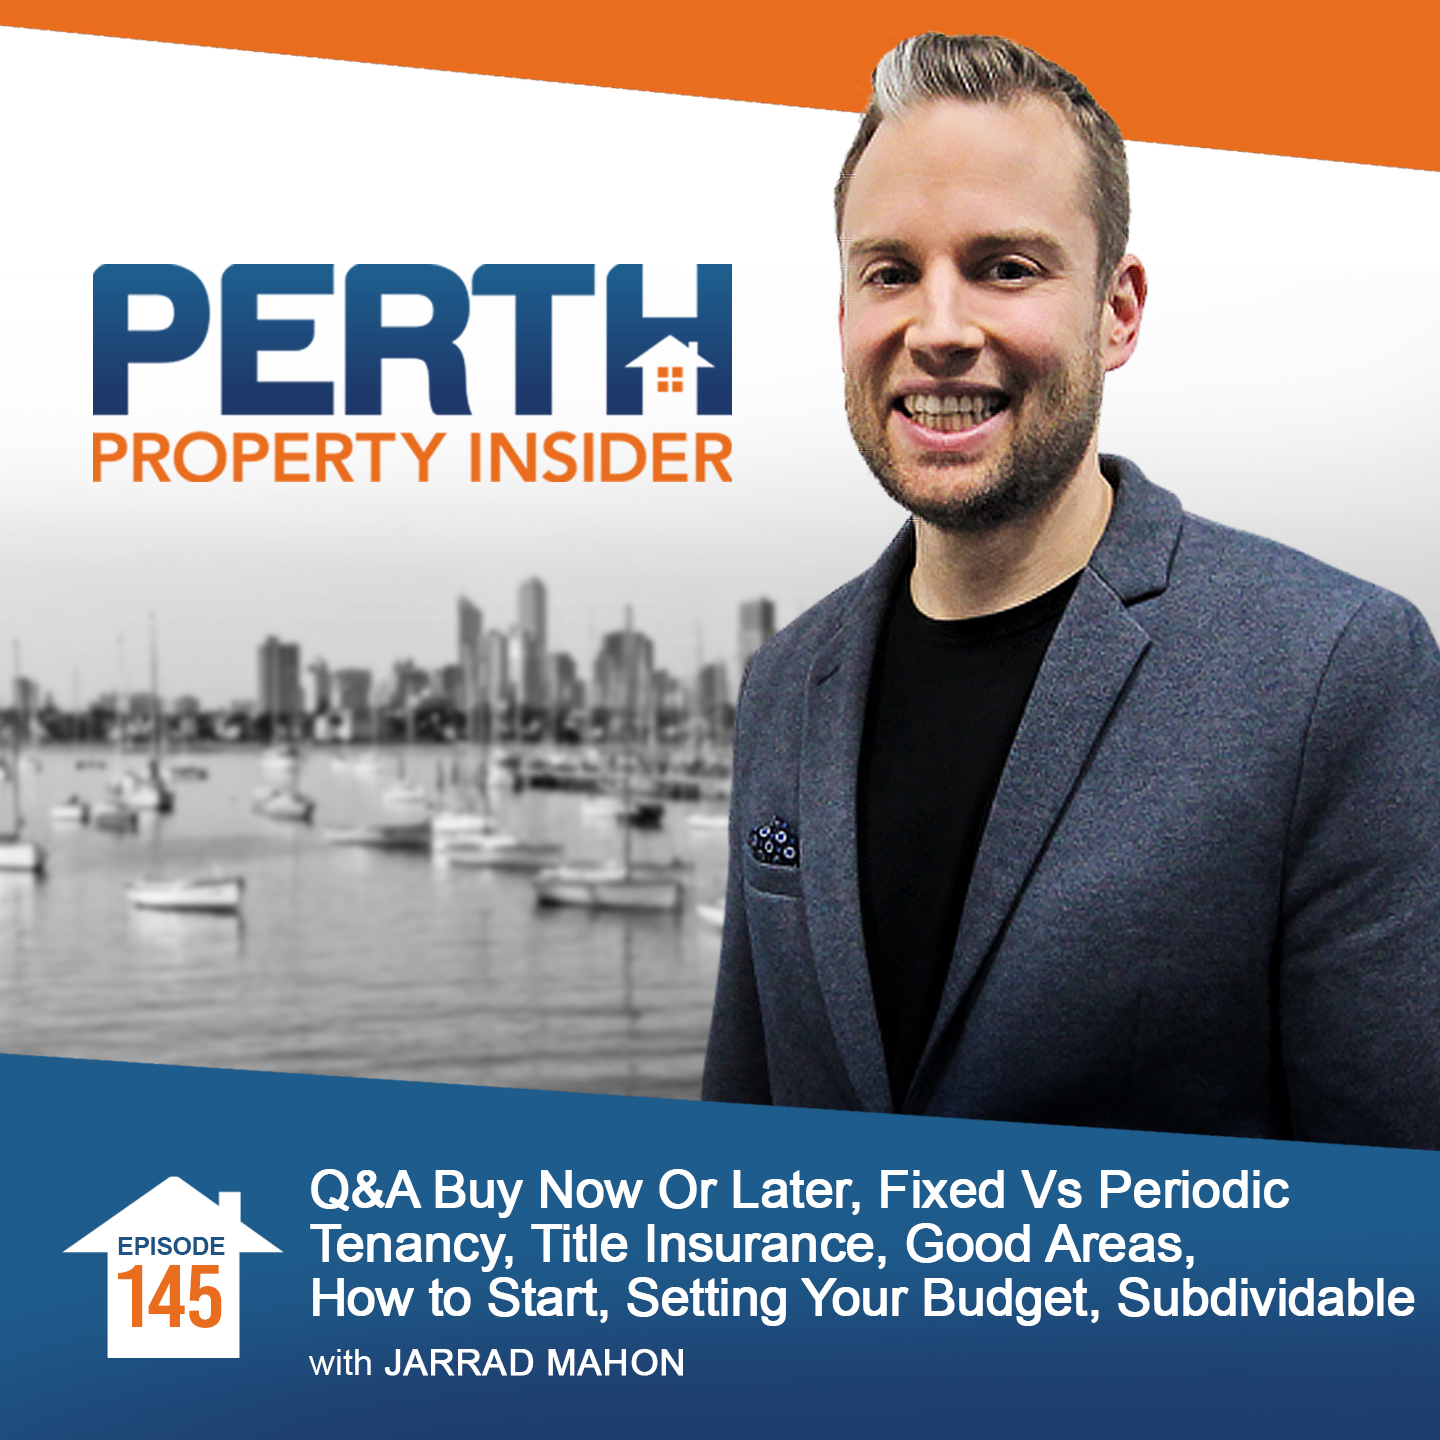 Q&A Buy Now Or Later, Fixed Vs Periodic Tenancy, Title Insurance, Good Areas, How to Start, Setting Your Budget, Subdividable